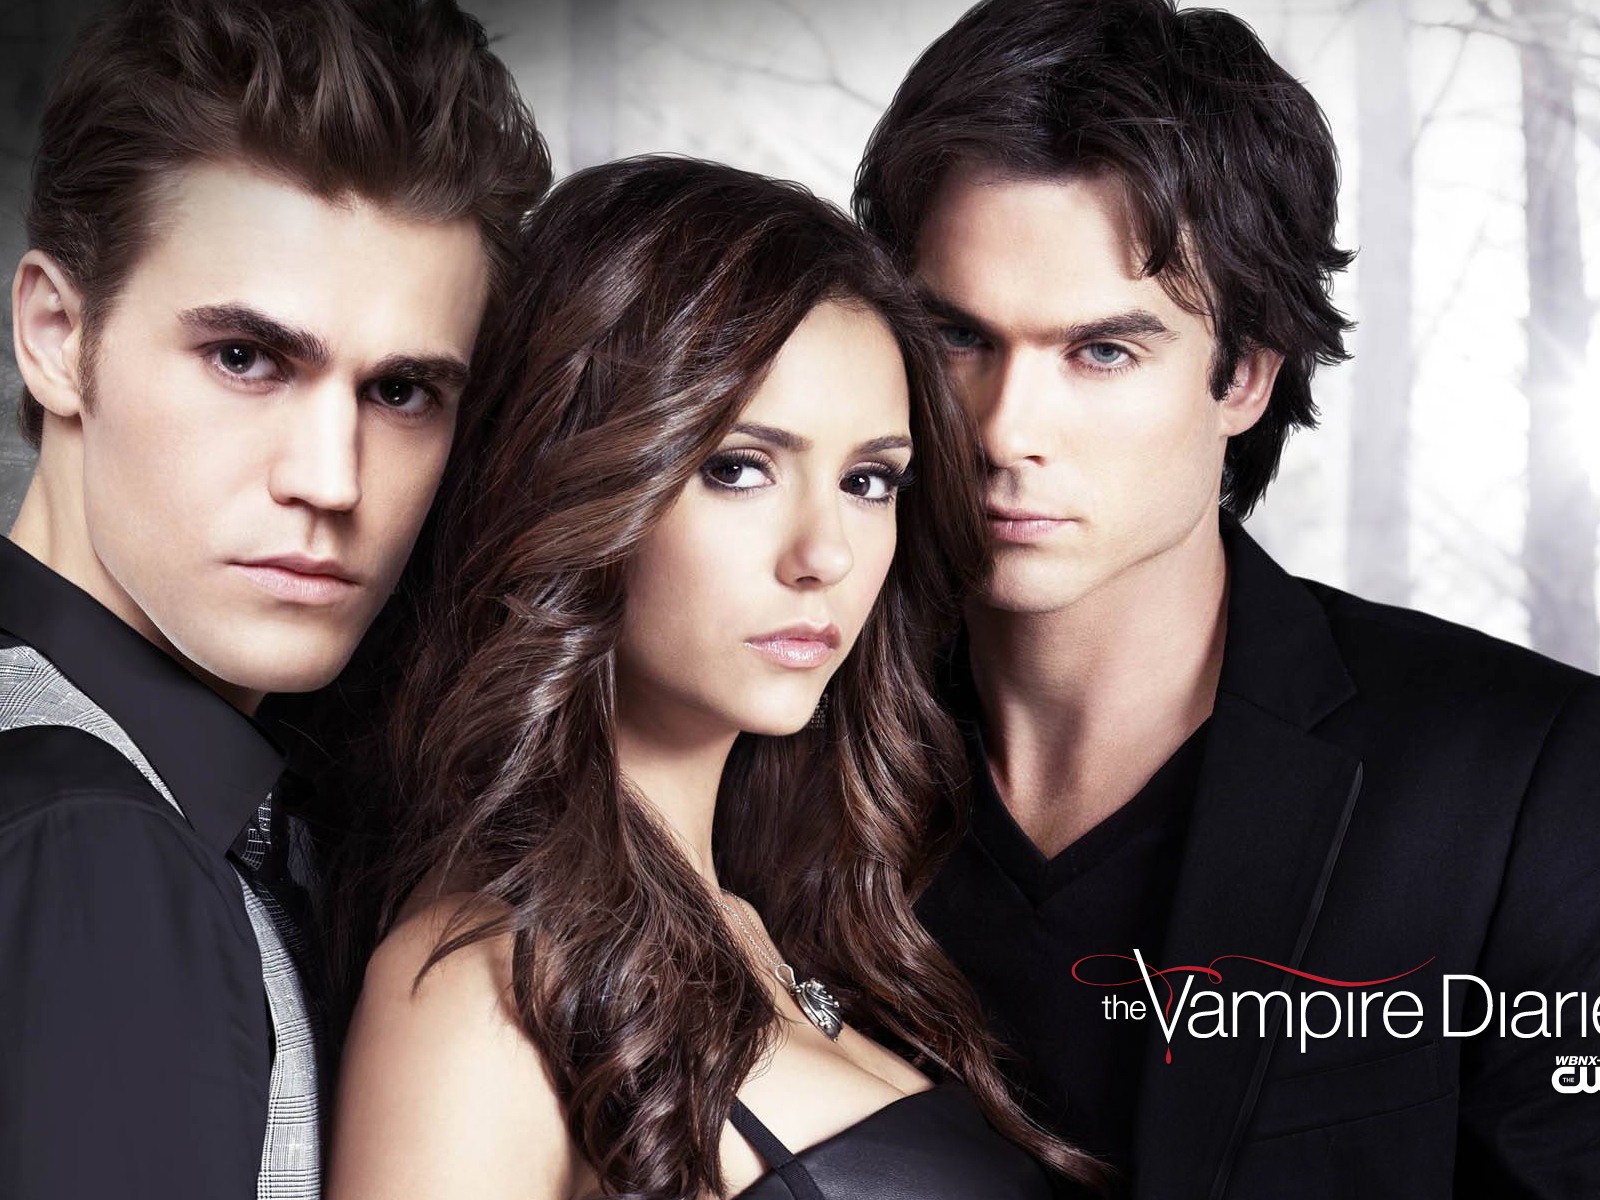 The Vampire Diaries HD Wallpapers #1 - 1600x1200